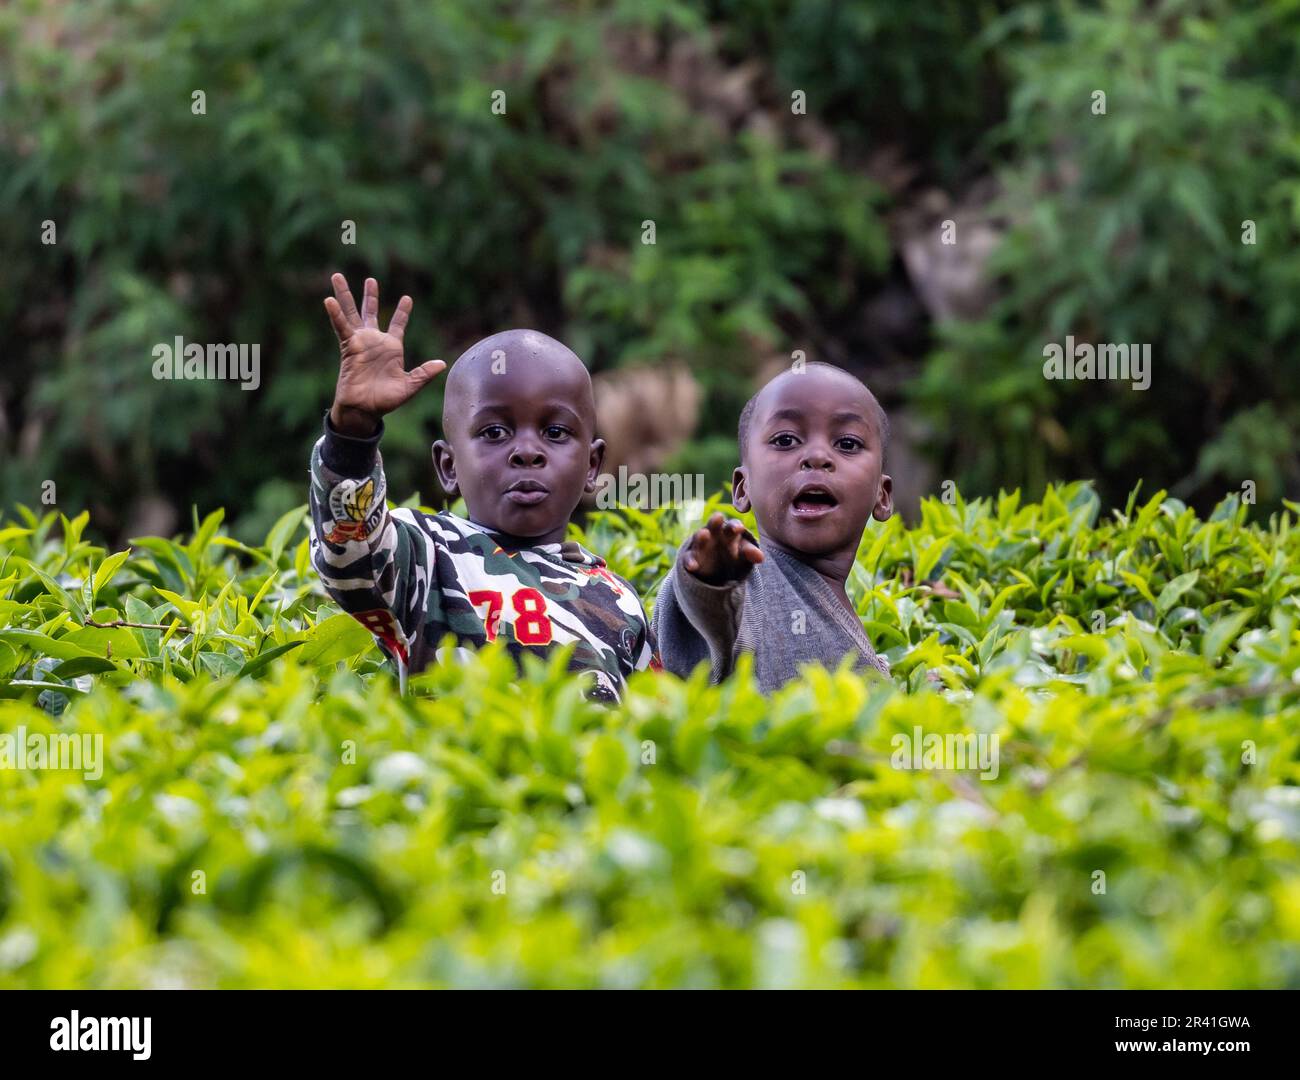 Two cheerful little boys wave to tourists. Kenya, Africa. Stock Photo